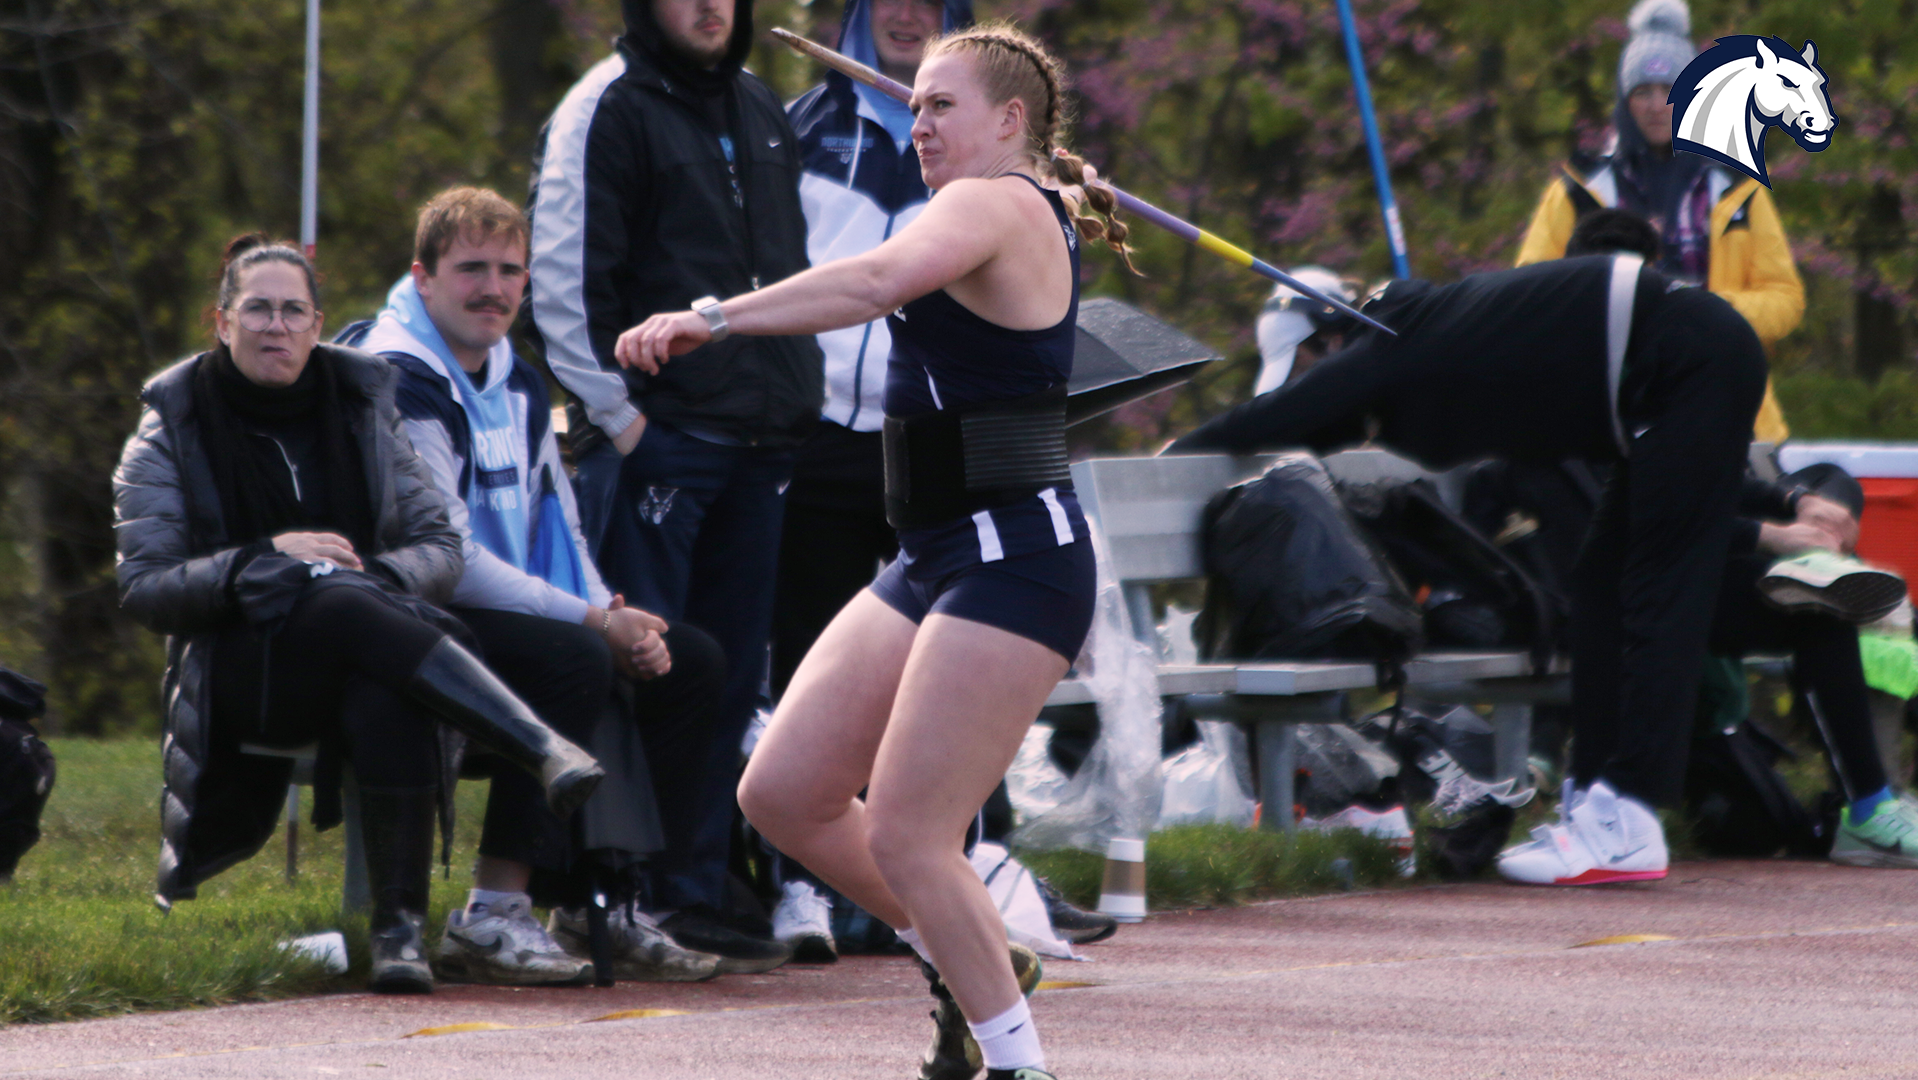 Chargers set three new provisional marks at tune-up meets ahead of G-MAC Championships